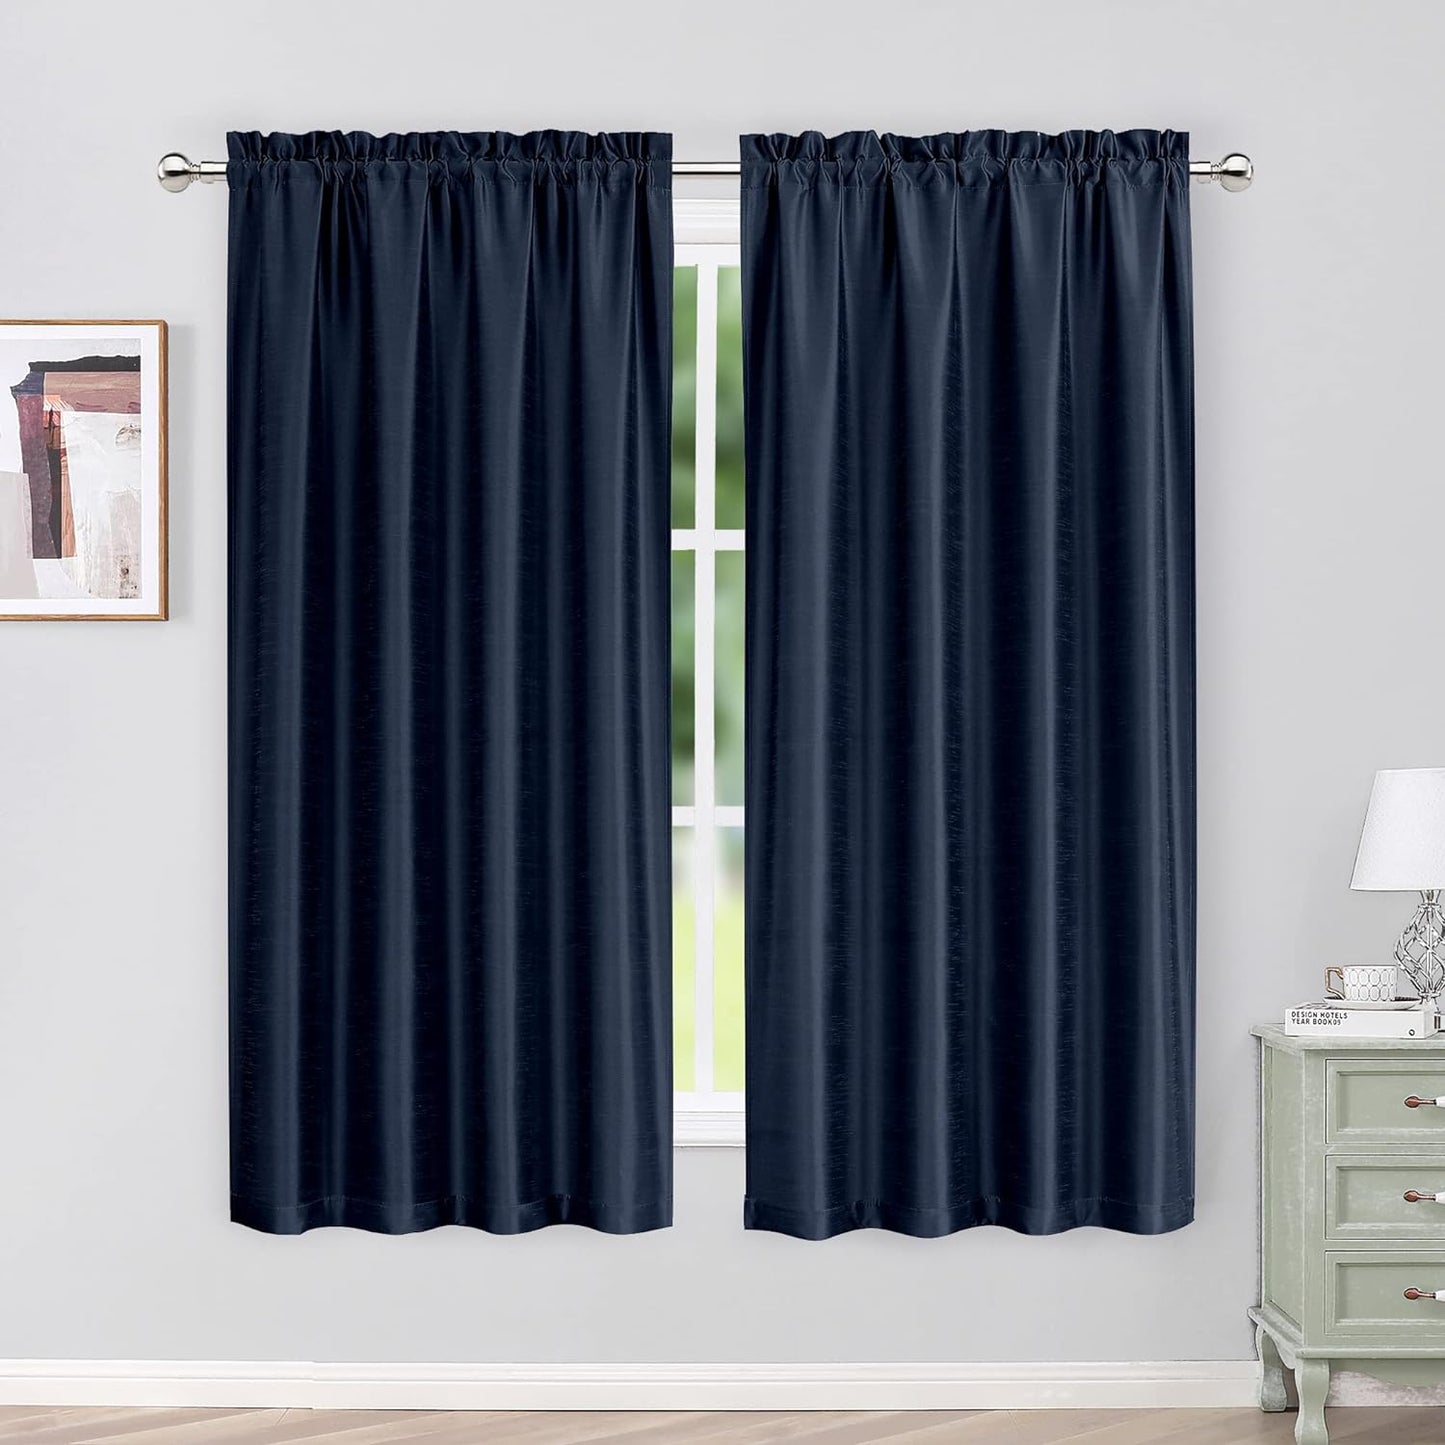 Chyhomenyc Uptown Sage Green Kitchen Curtains 45 Inch Length 2 Panels, Room Darkening Faux Silk Chic Fabric Short Window Curtains for Bedroom Living Room, Each 30Wx45L  Chyhomenyc Navy Blue 2X40"Wx63"L 